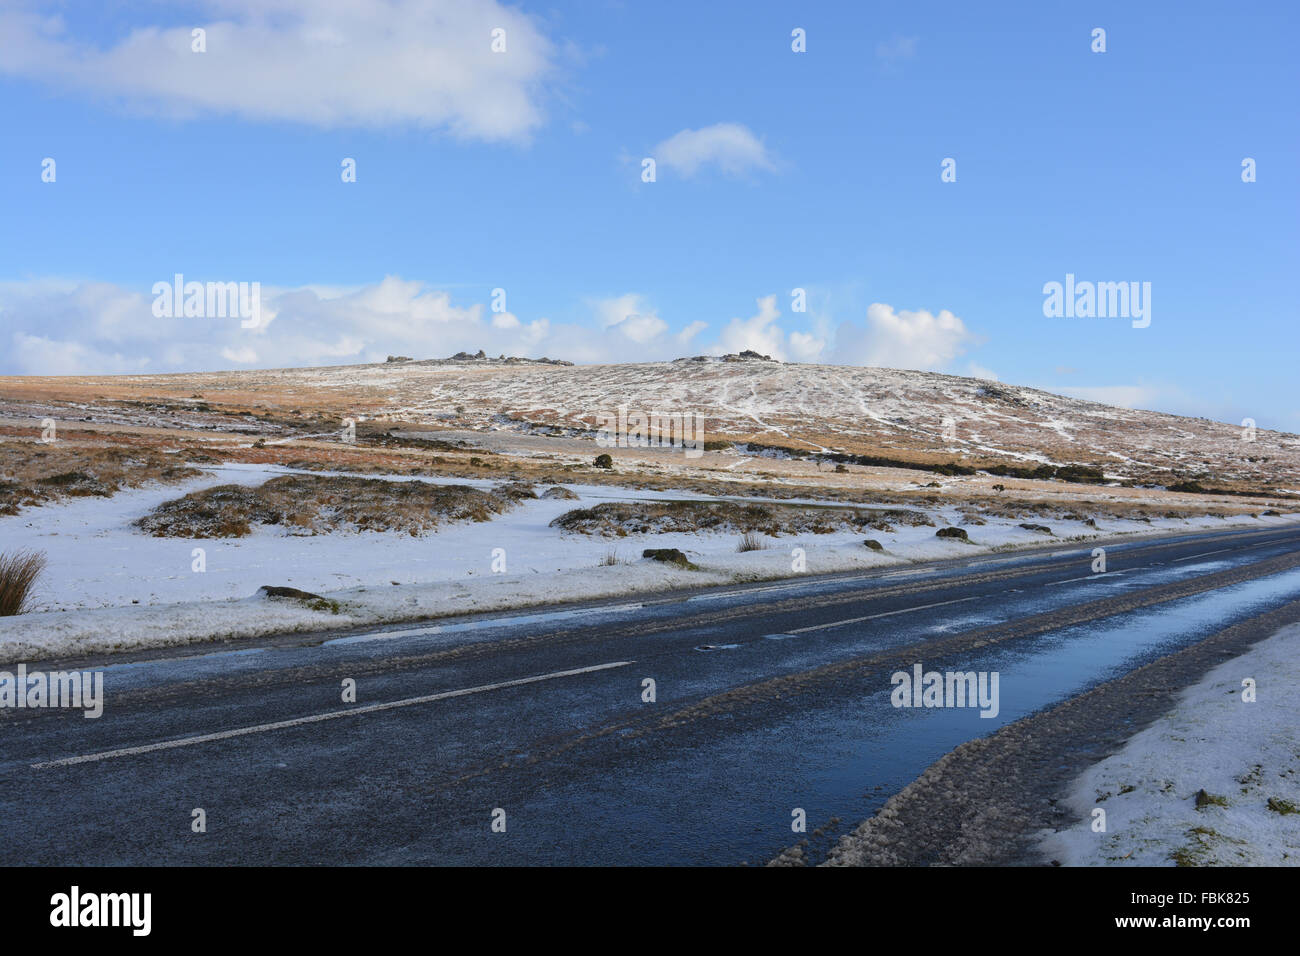 Pork Hill in winter with melting snow and ice on road, Great Staple Tor  on horizon, Dartmoor National Park, Devon, UK Stock Photo